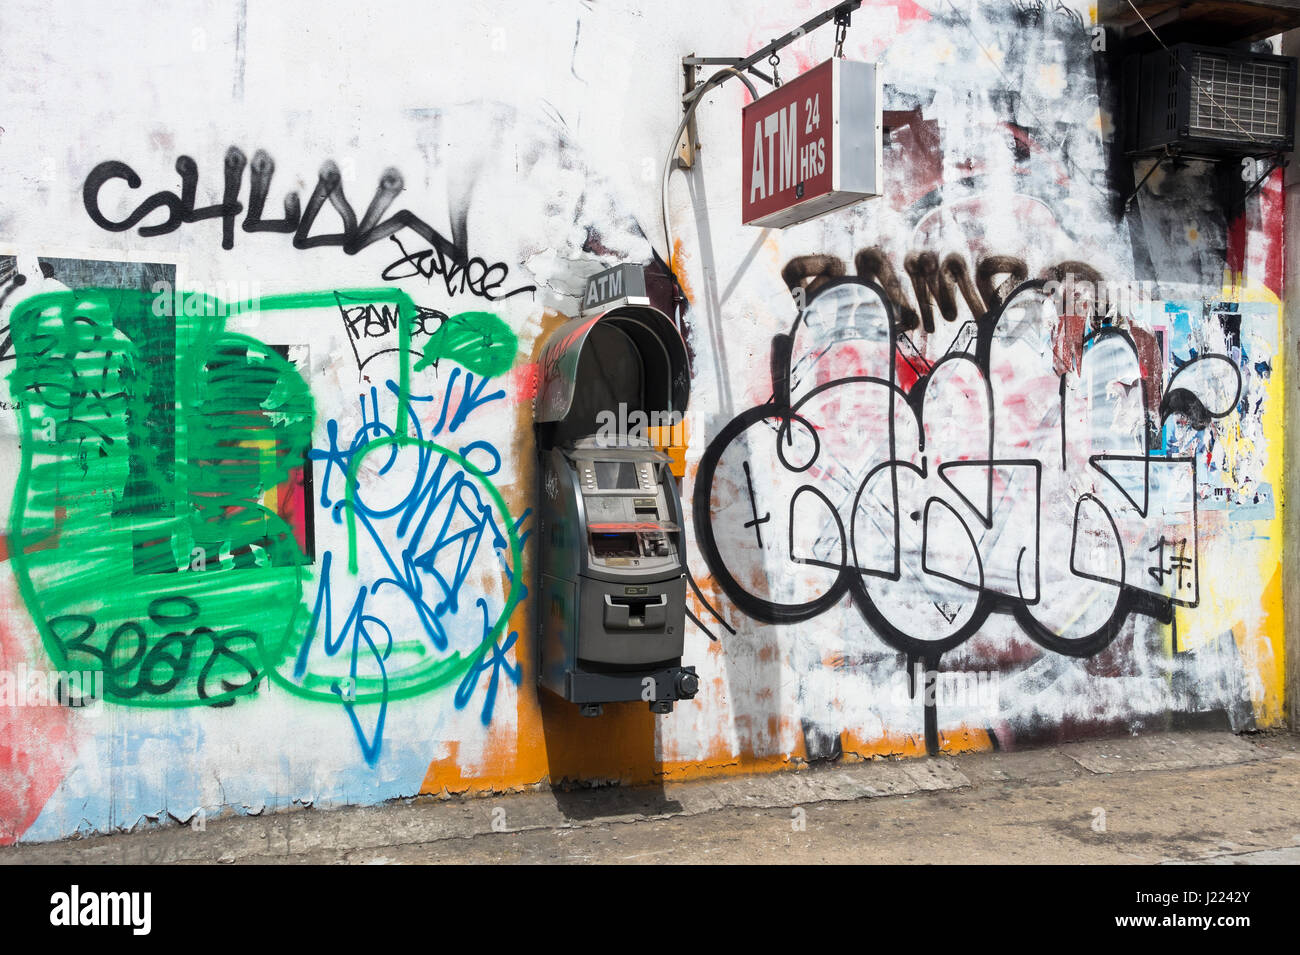 Privately owned ATM machine on the wall of a building in Lower Manhattan surrounded by graffiti Stock Photo